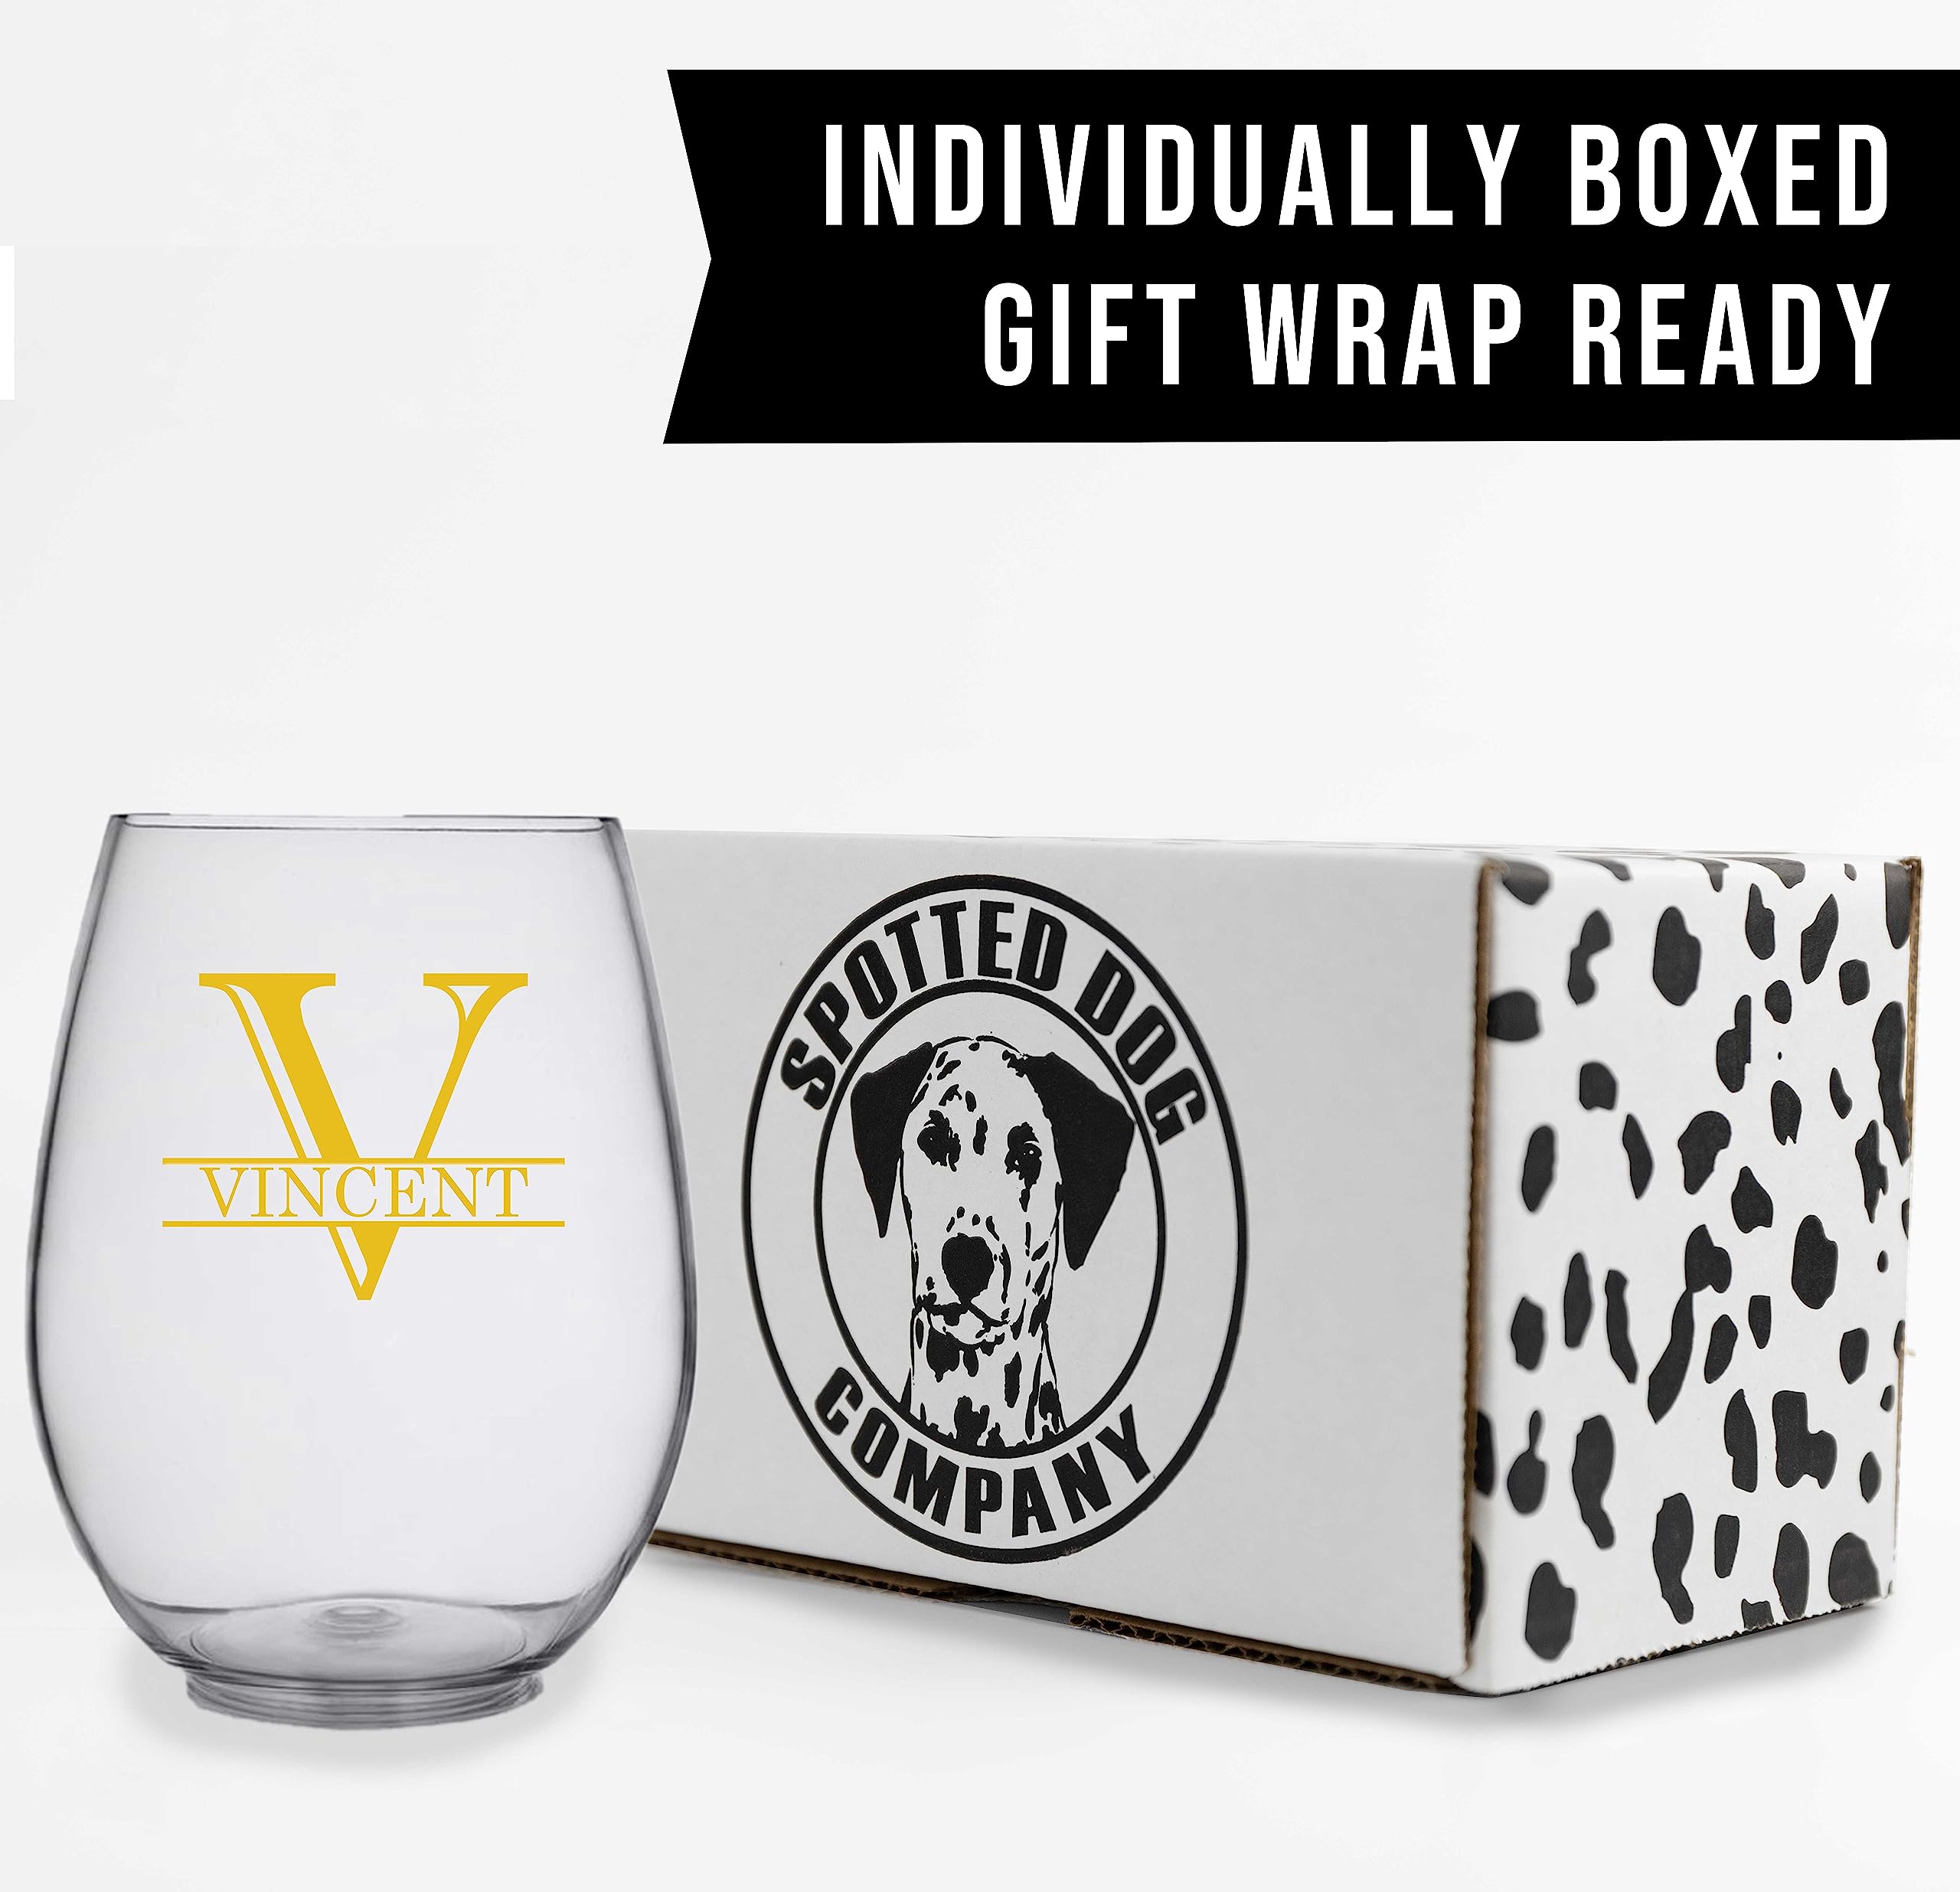 Personalized Printed 17oz Stemless Wine Glass, Gifts for Women, Customized Christmas Gifts, Unique Custom Gifts for Mom, Customizable Bridesmaid Birthday Wine Tumbler, Halpert Monogram